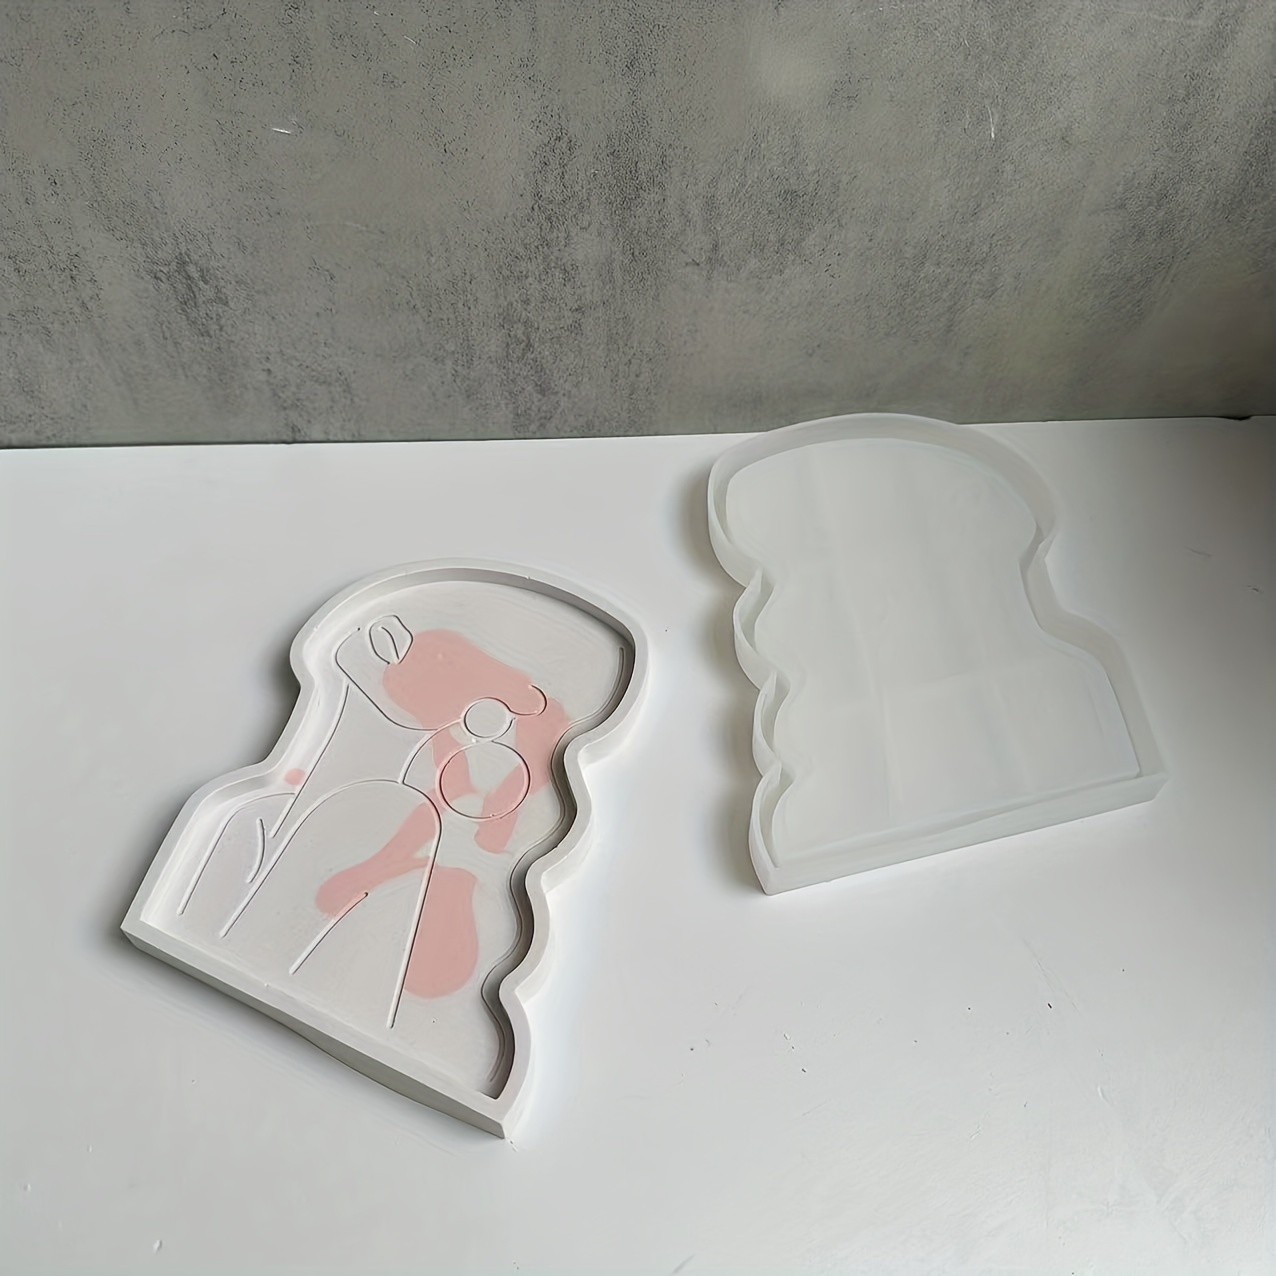 Utensil Rest Mold, Large Rolling Tray Resin Mold, Storage Tray Silicone Mold,  Utensil Rest Mold With Drip Pad, Spoon Holder Tray Mold 